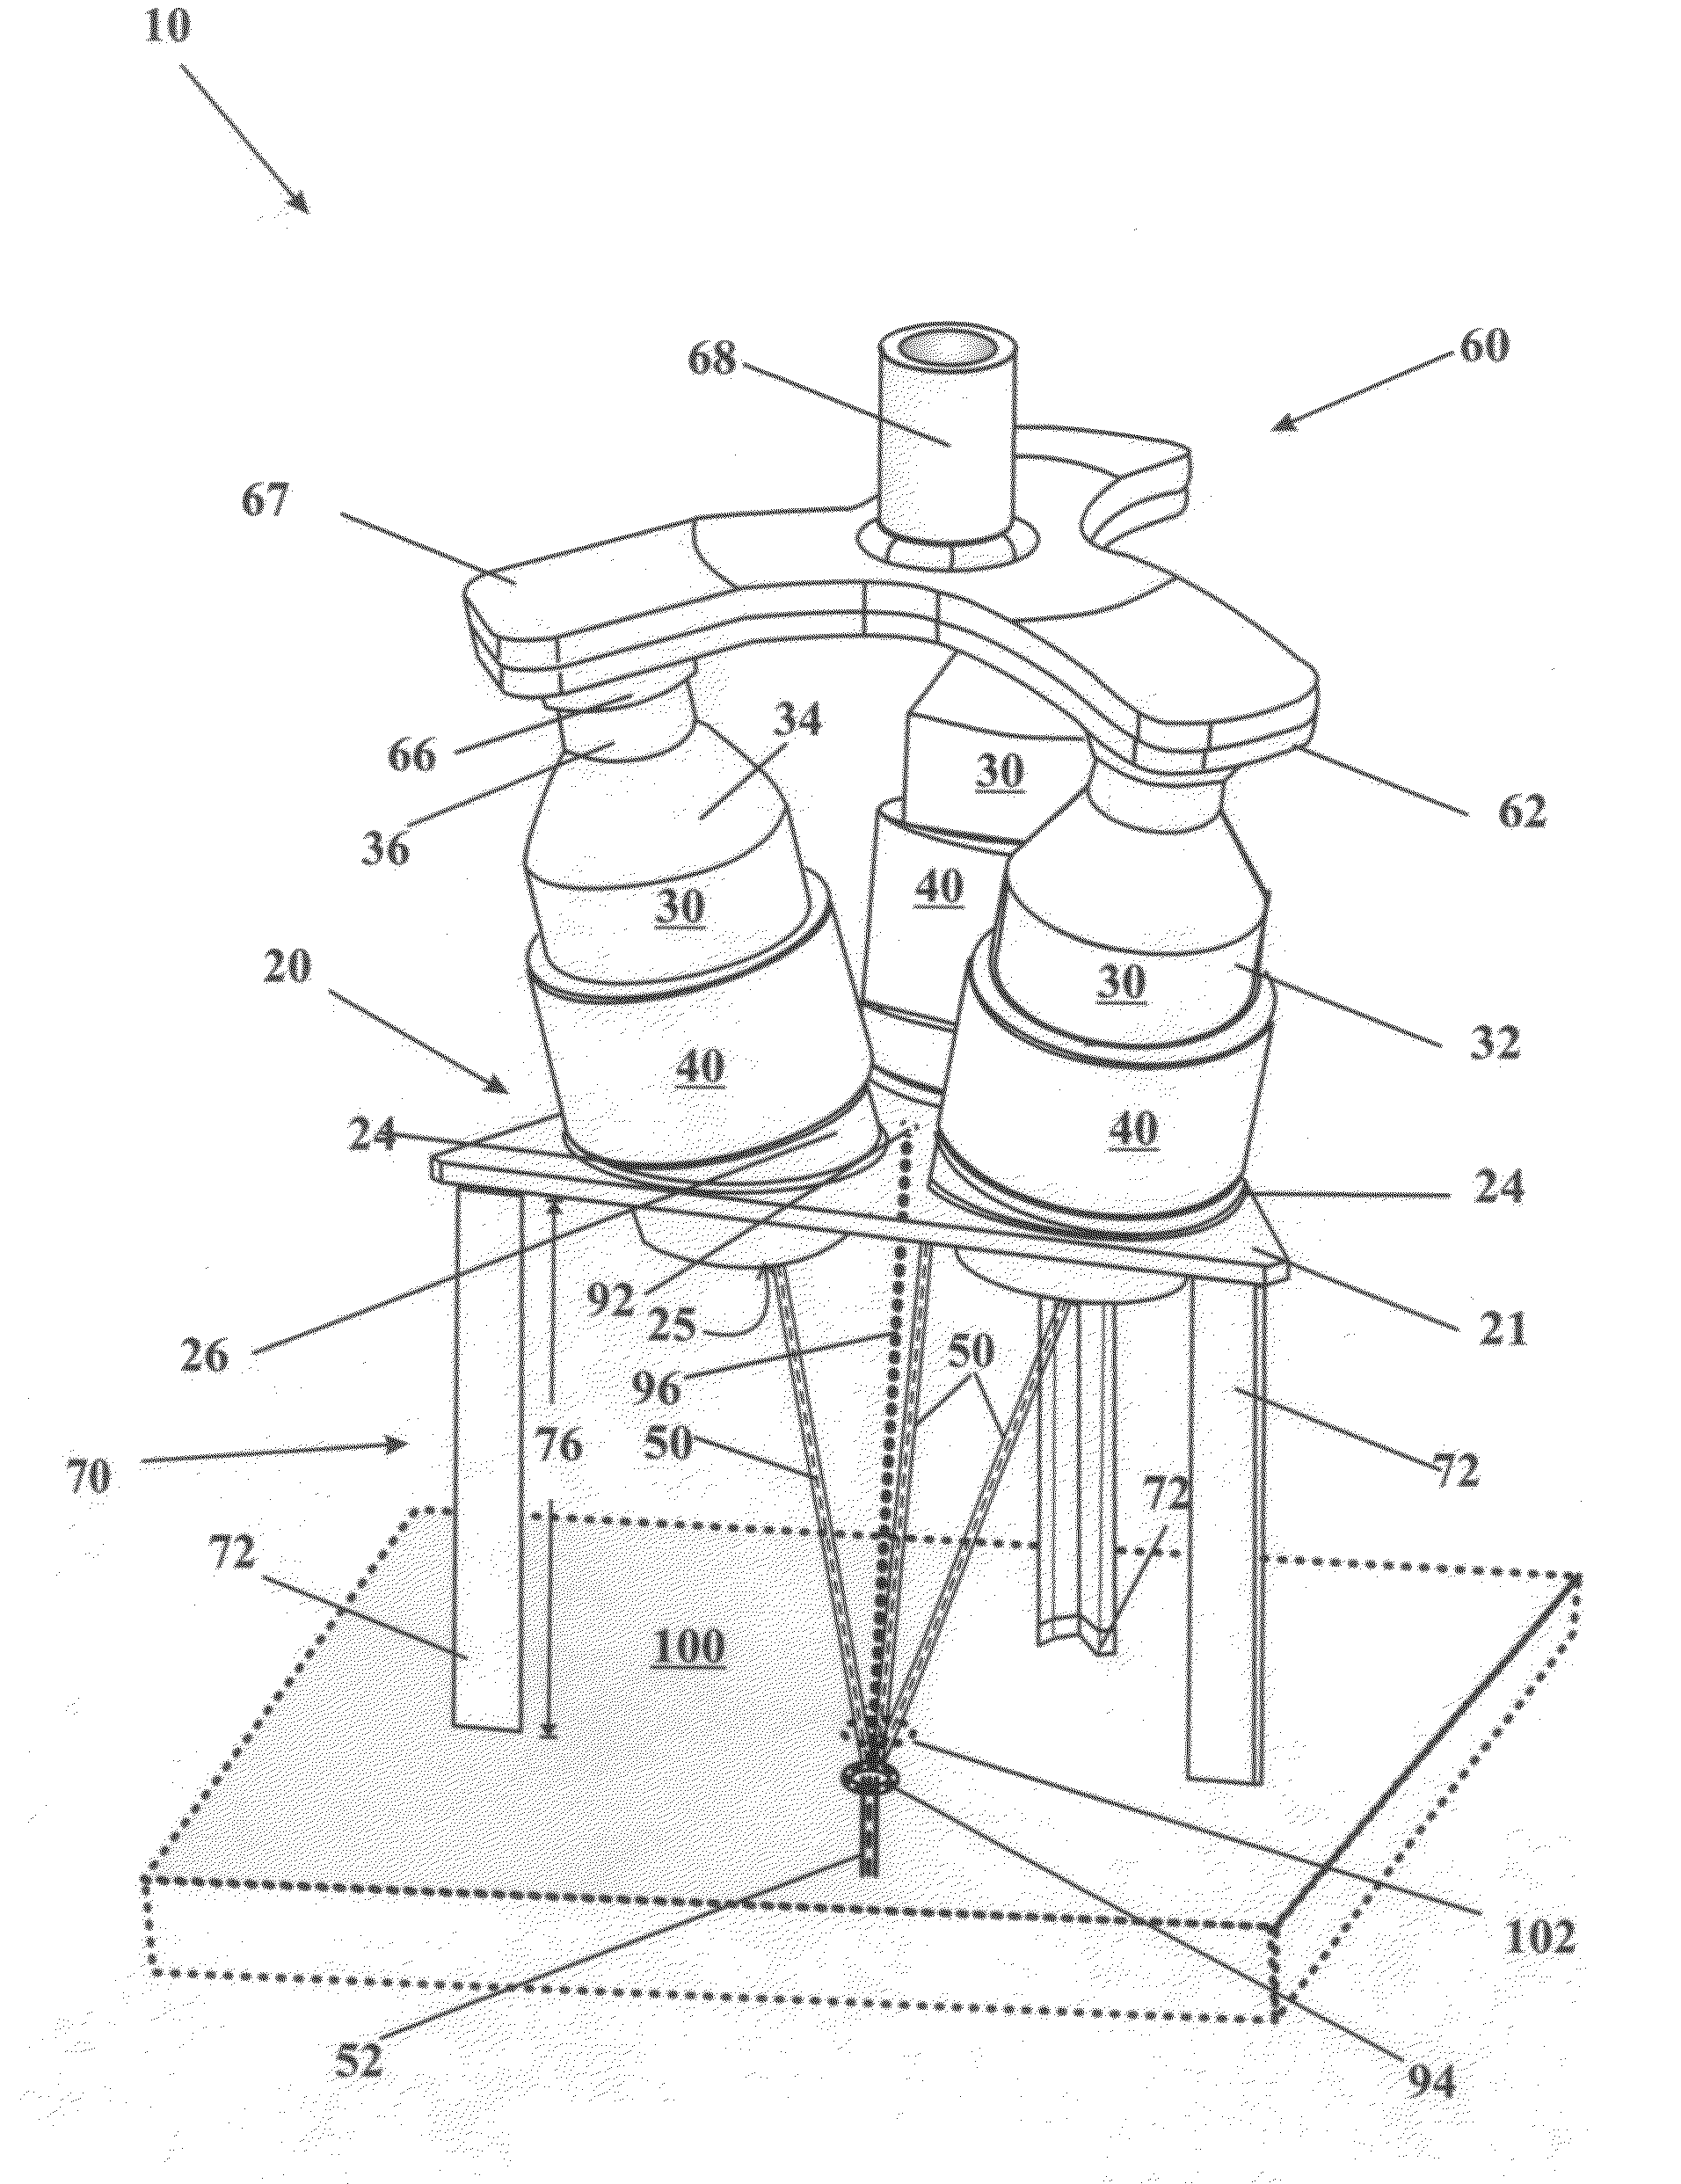 Holder that converges jets created by a plurality of shape charges